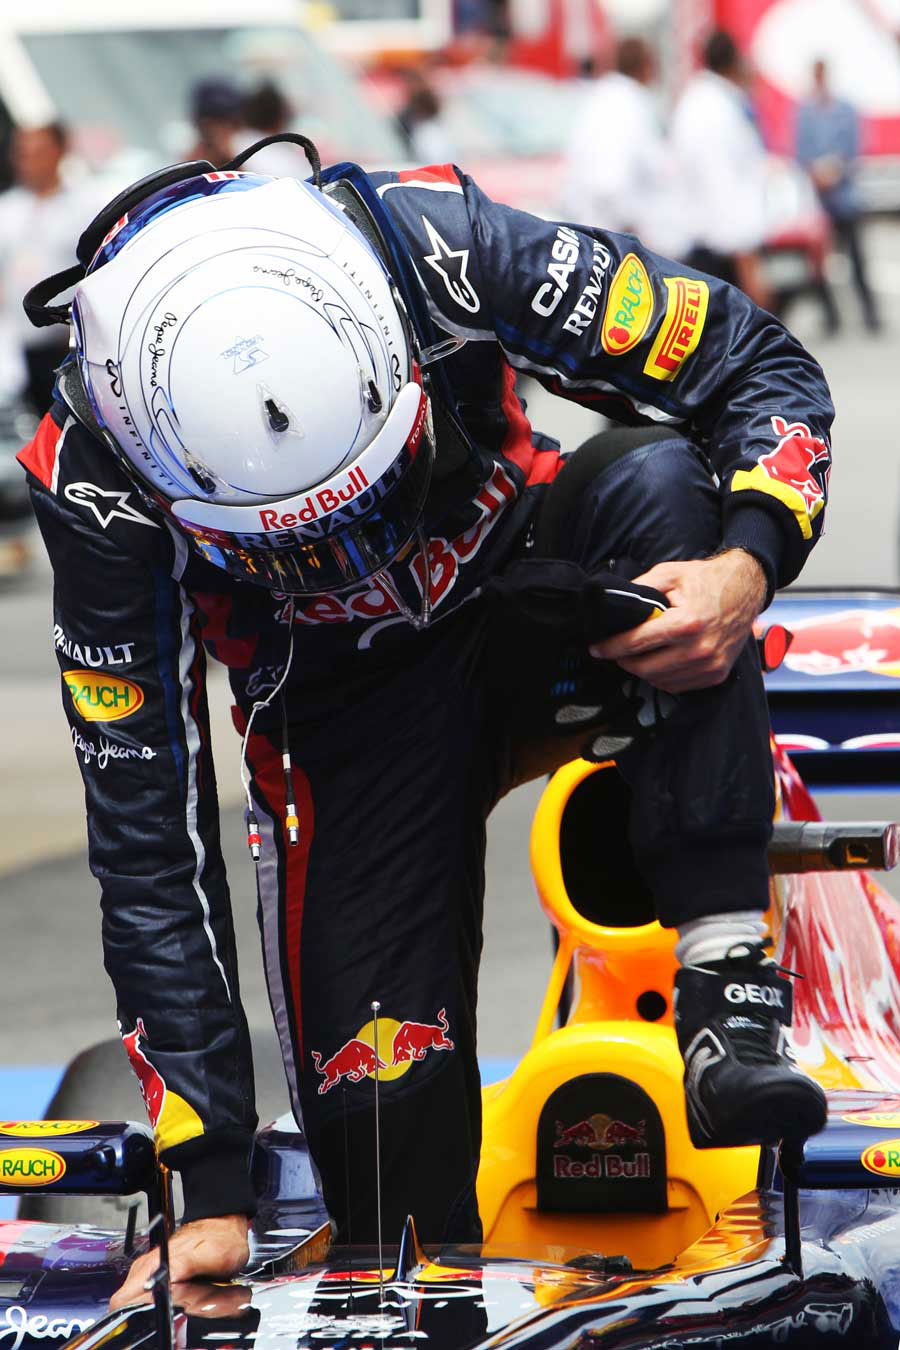 Sebastian Vettel climbs from his RB8 after qualifying